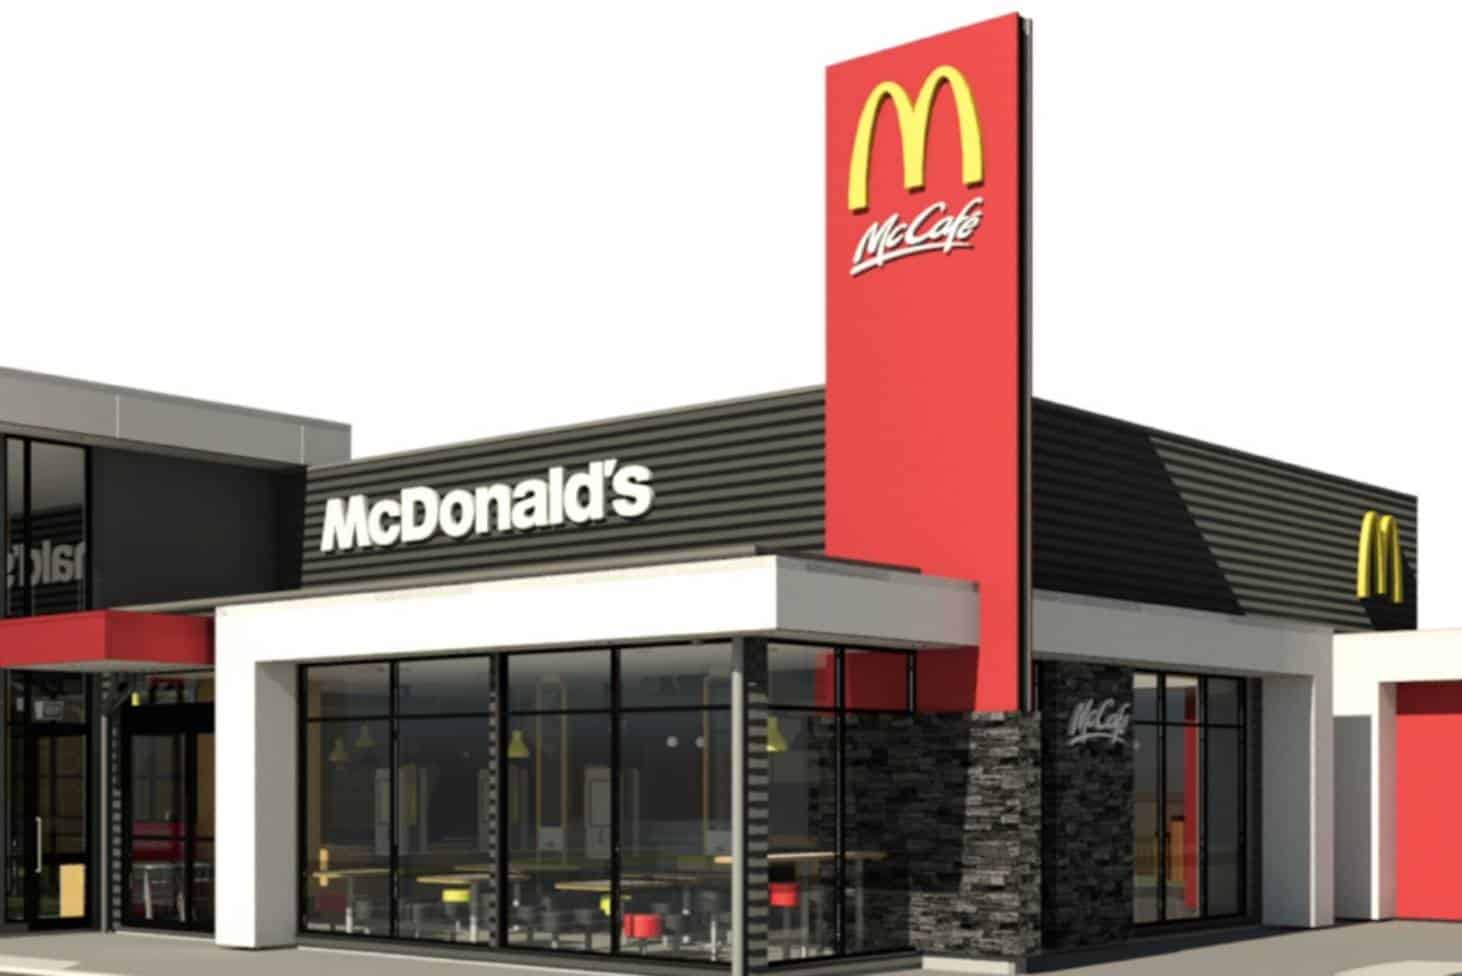 McDonald's is planning to enter the metaverse with their virtual restaurant